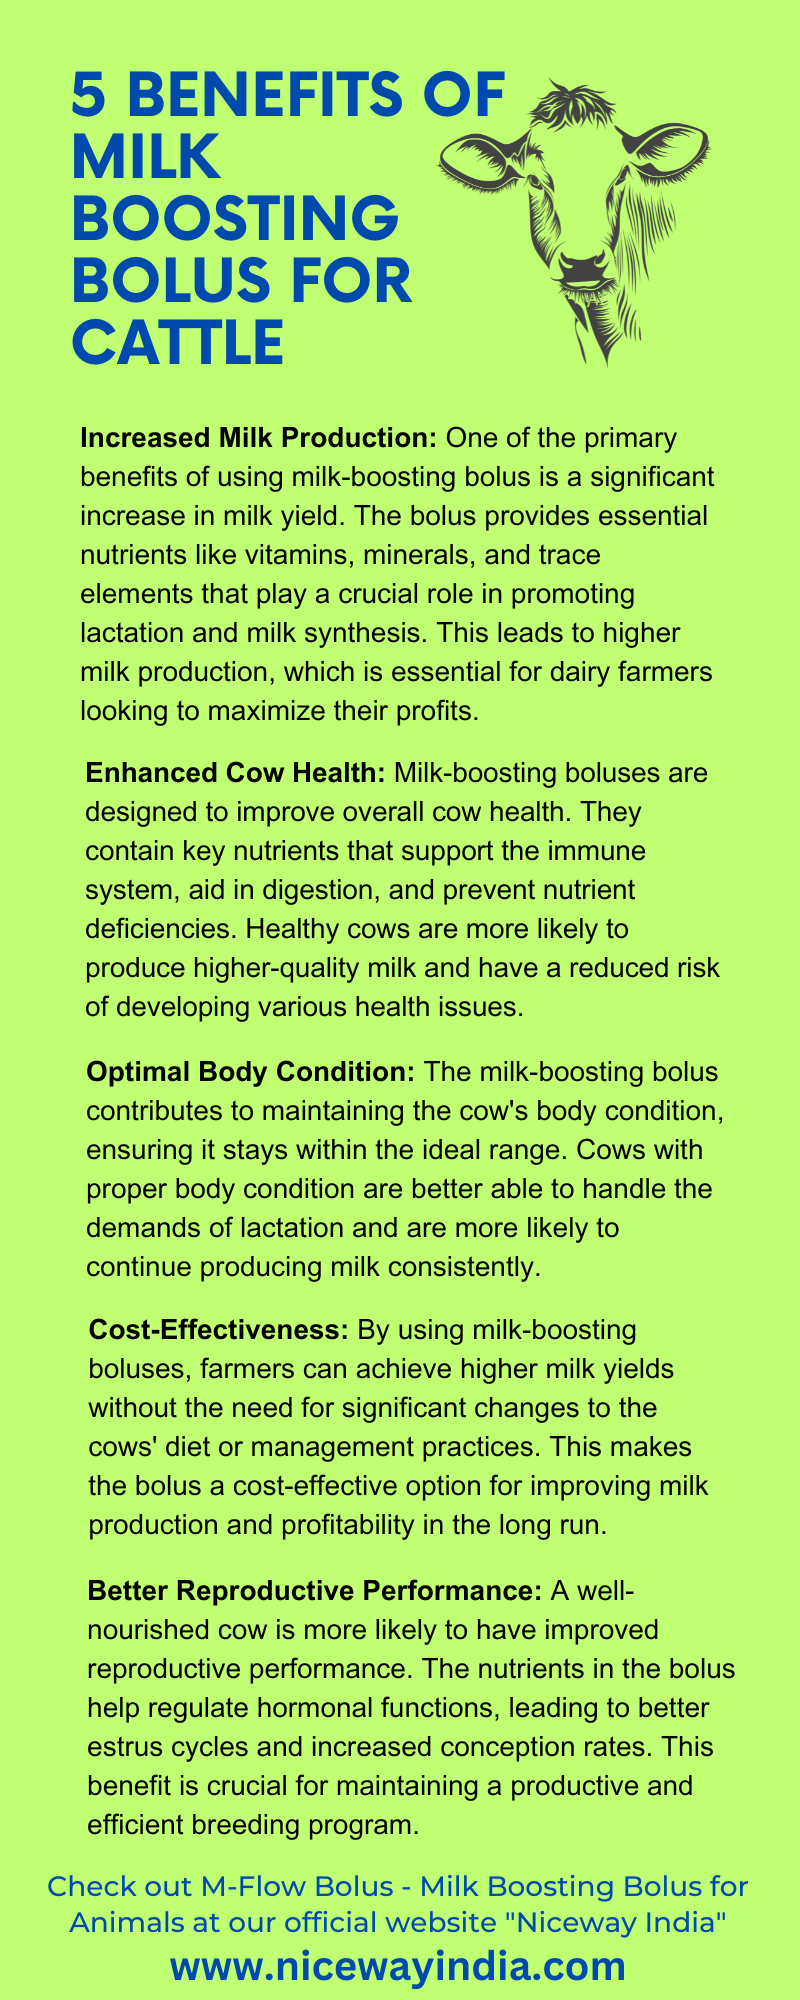 5 BENEFITS OF go»
MILK hE)
BOOSTING 0 |
BOLUS FOR =
CATTLE v

Increased Milk Production: One of the primary
benefits of using milk-boosting bolus is a significant
increase in milk yield. The bolus provides essential
nutrients like vitamins, minerals, and trace
elements that play a crucial role in promoting
lactation and milk synthesis. This leads to higher
milk production, which is essential for dairy farmers
looking to maximize their profits.

 

Enhanced Cow Health: Milk-boosting boluses are
designed to improve overall cow health. They
contain key nutrients that support the immune
system, aid in digestion, and prevent nutrient
deficiencies. Healthy cows are more likely to
produce higher-quality milk and have a reduced risk
of developing various health issues.

Optimal Body Condition: The milk-boosting bolus
contributes to maintaining the cow's body condition,
ensuring it stays within the ideal range. Cows with
proper body condition are better able to handle the
demands of lactation and are more likely to
continue producing milk consistently.

Cost-Effectiveness: By using milk-boosting
boluses, farmers can achieve higher milk yields
without the need for significant changes to the
cows' diet or management practices. This makes
the bolus a cost-effective option for improving milk
production and profitability in the long run.

Better Reproductive Performance: A well-
nourished cow is more likely to have improved
reproductive performance. The nutrients in the bolus
help regulate hormonal functions, leading to better
estrus cycles and increased conception rates. This
benefit is crucial for maintaining a productive and
efficient breeding program.

Check out M-Flow Bolus - Milk Boosting Bolus for
Animals at our official website "Niceway India"

www.nhicewayindia.com